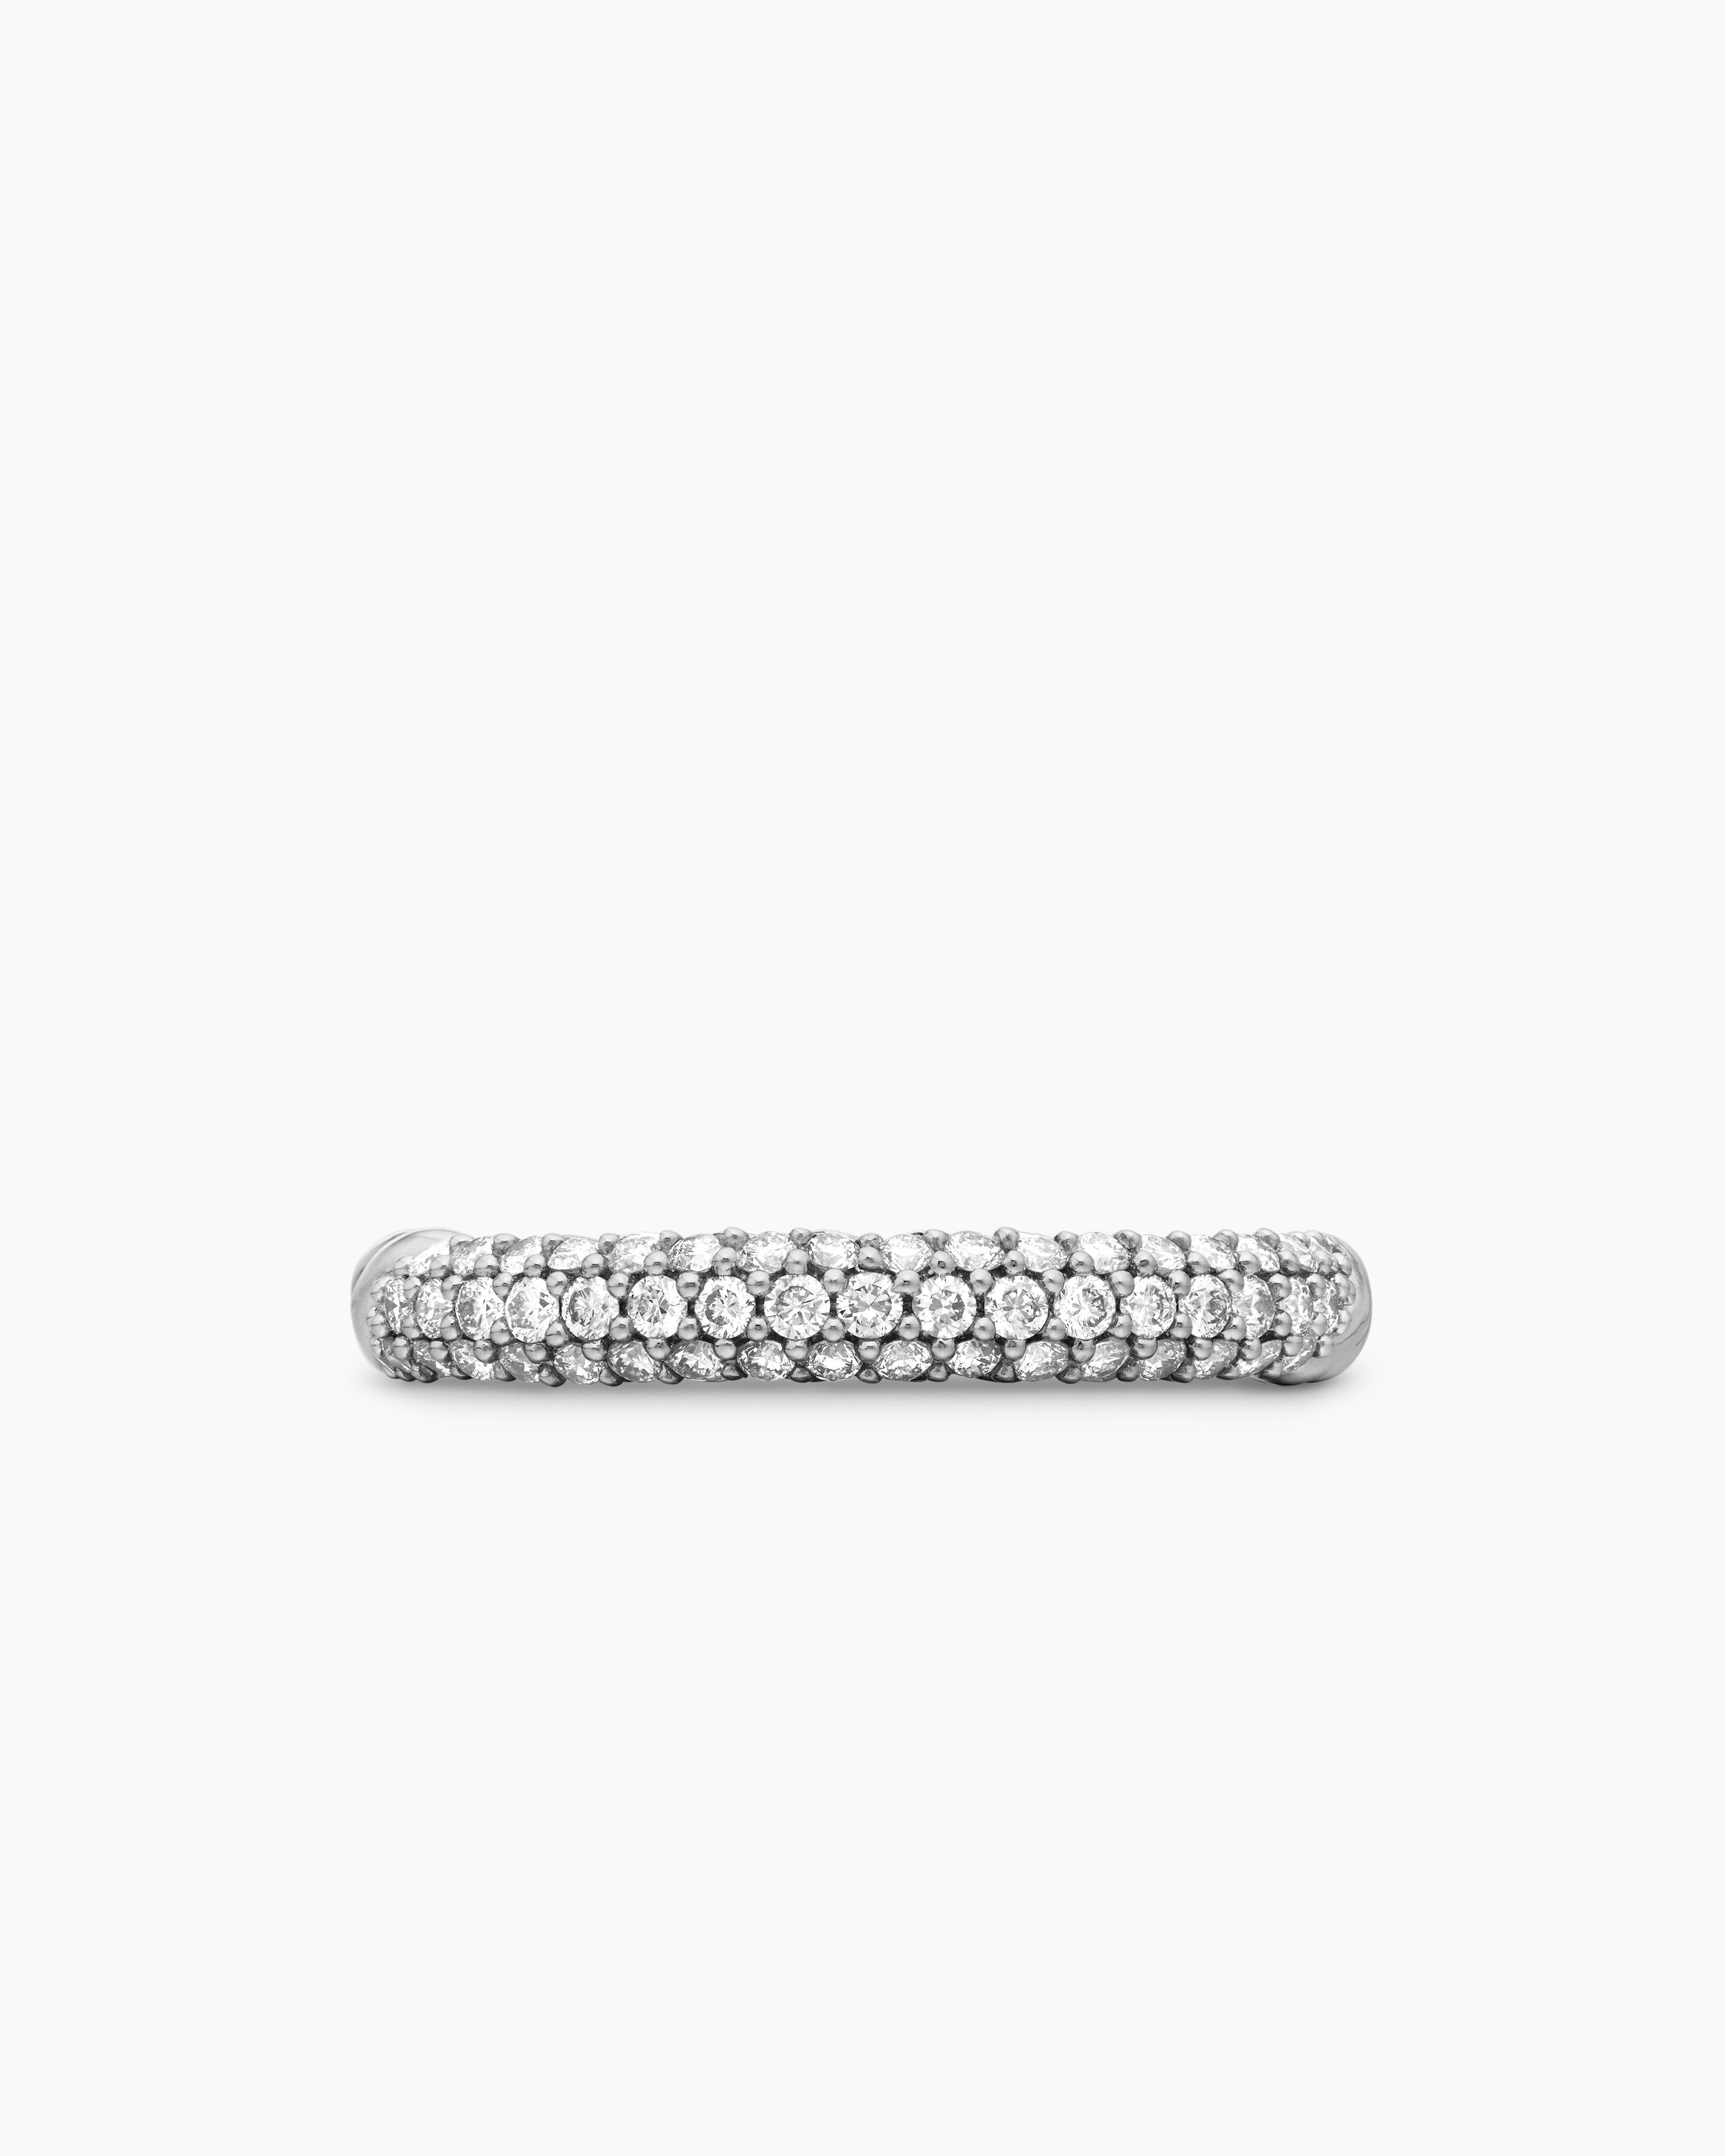 Petite Pavé Stack Ring in Sterling Silver, 3mm